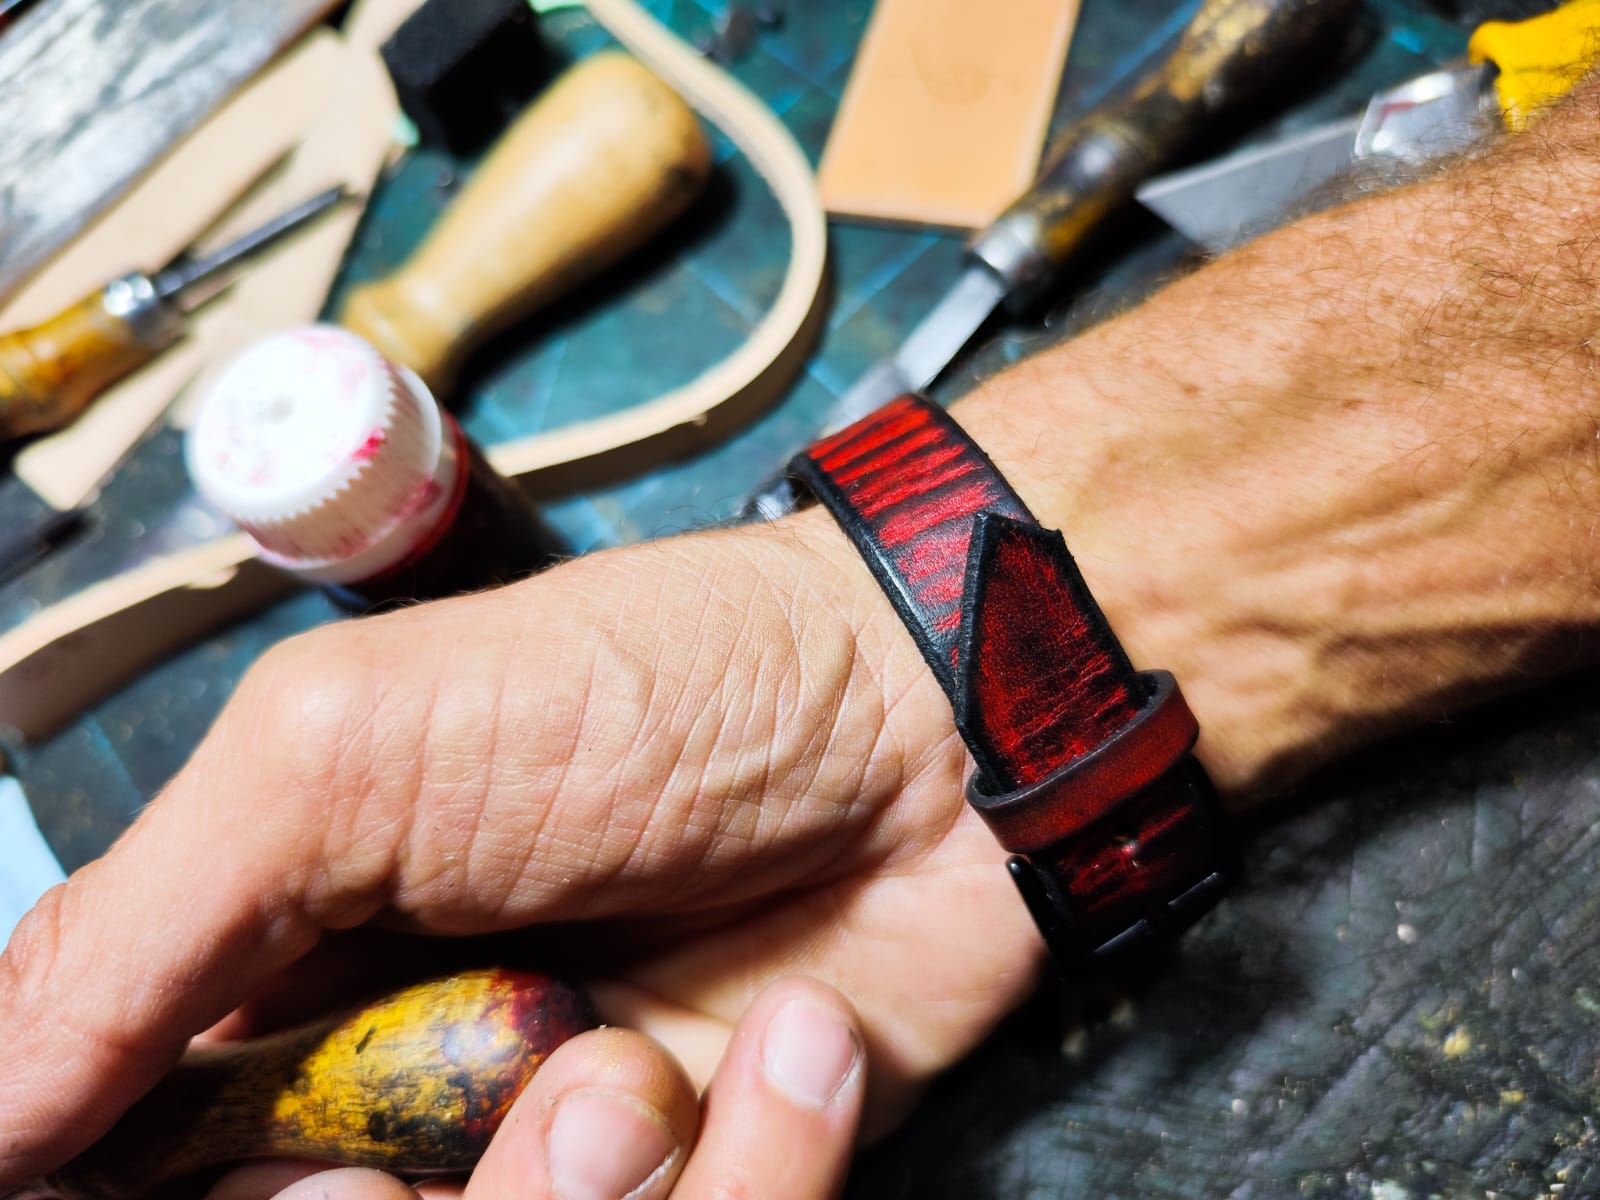 Apple Watch Band - Red Leather With black wash